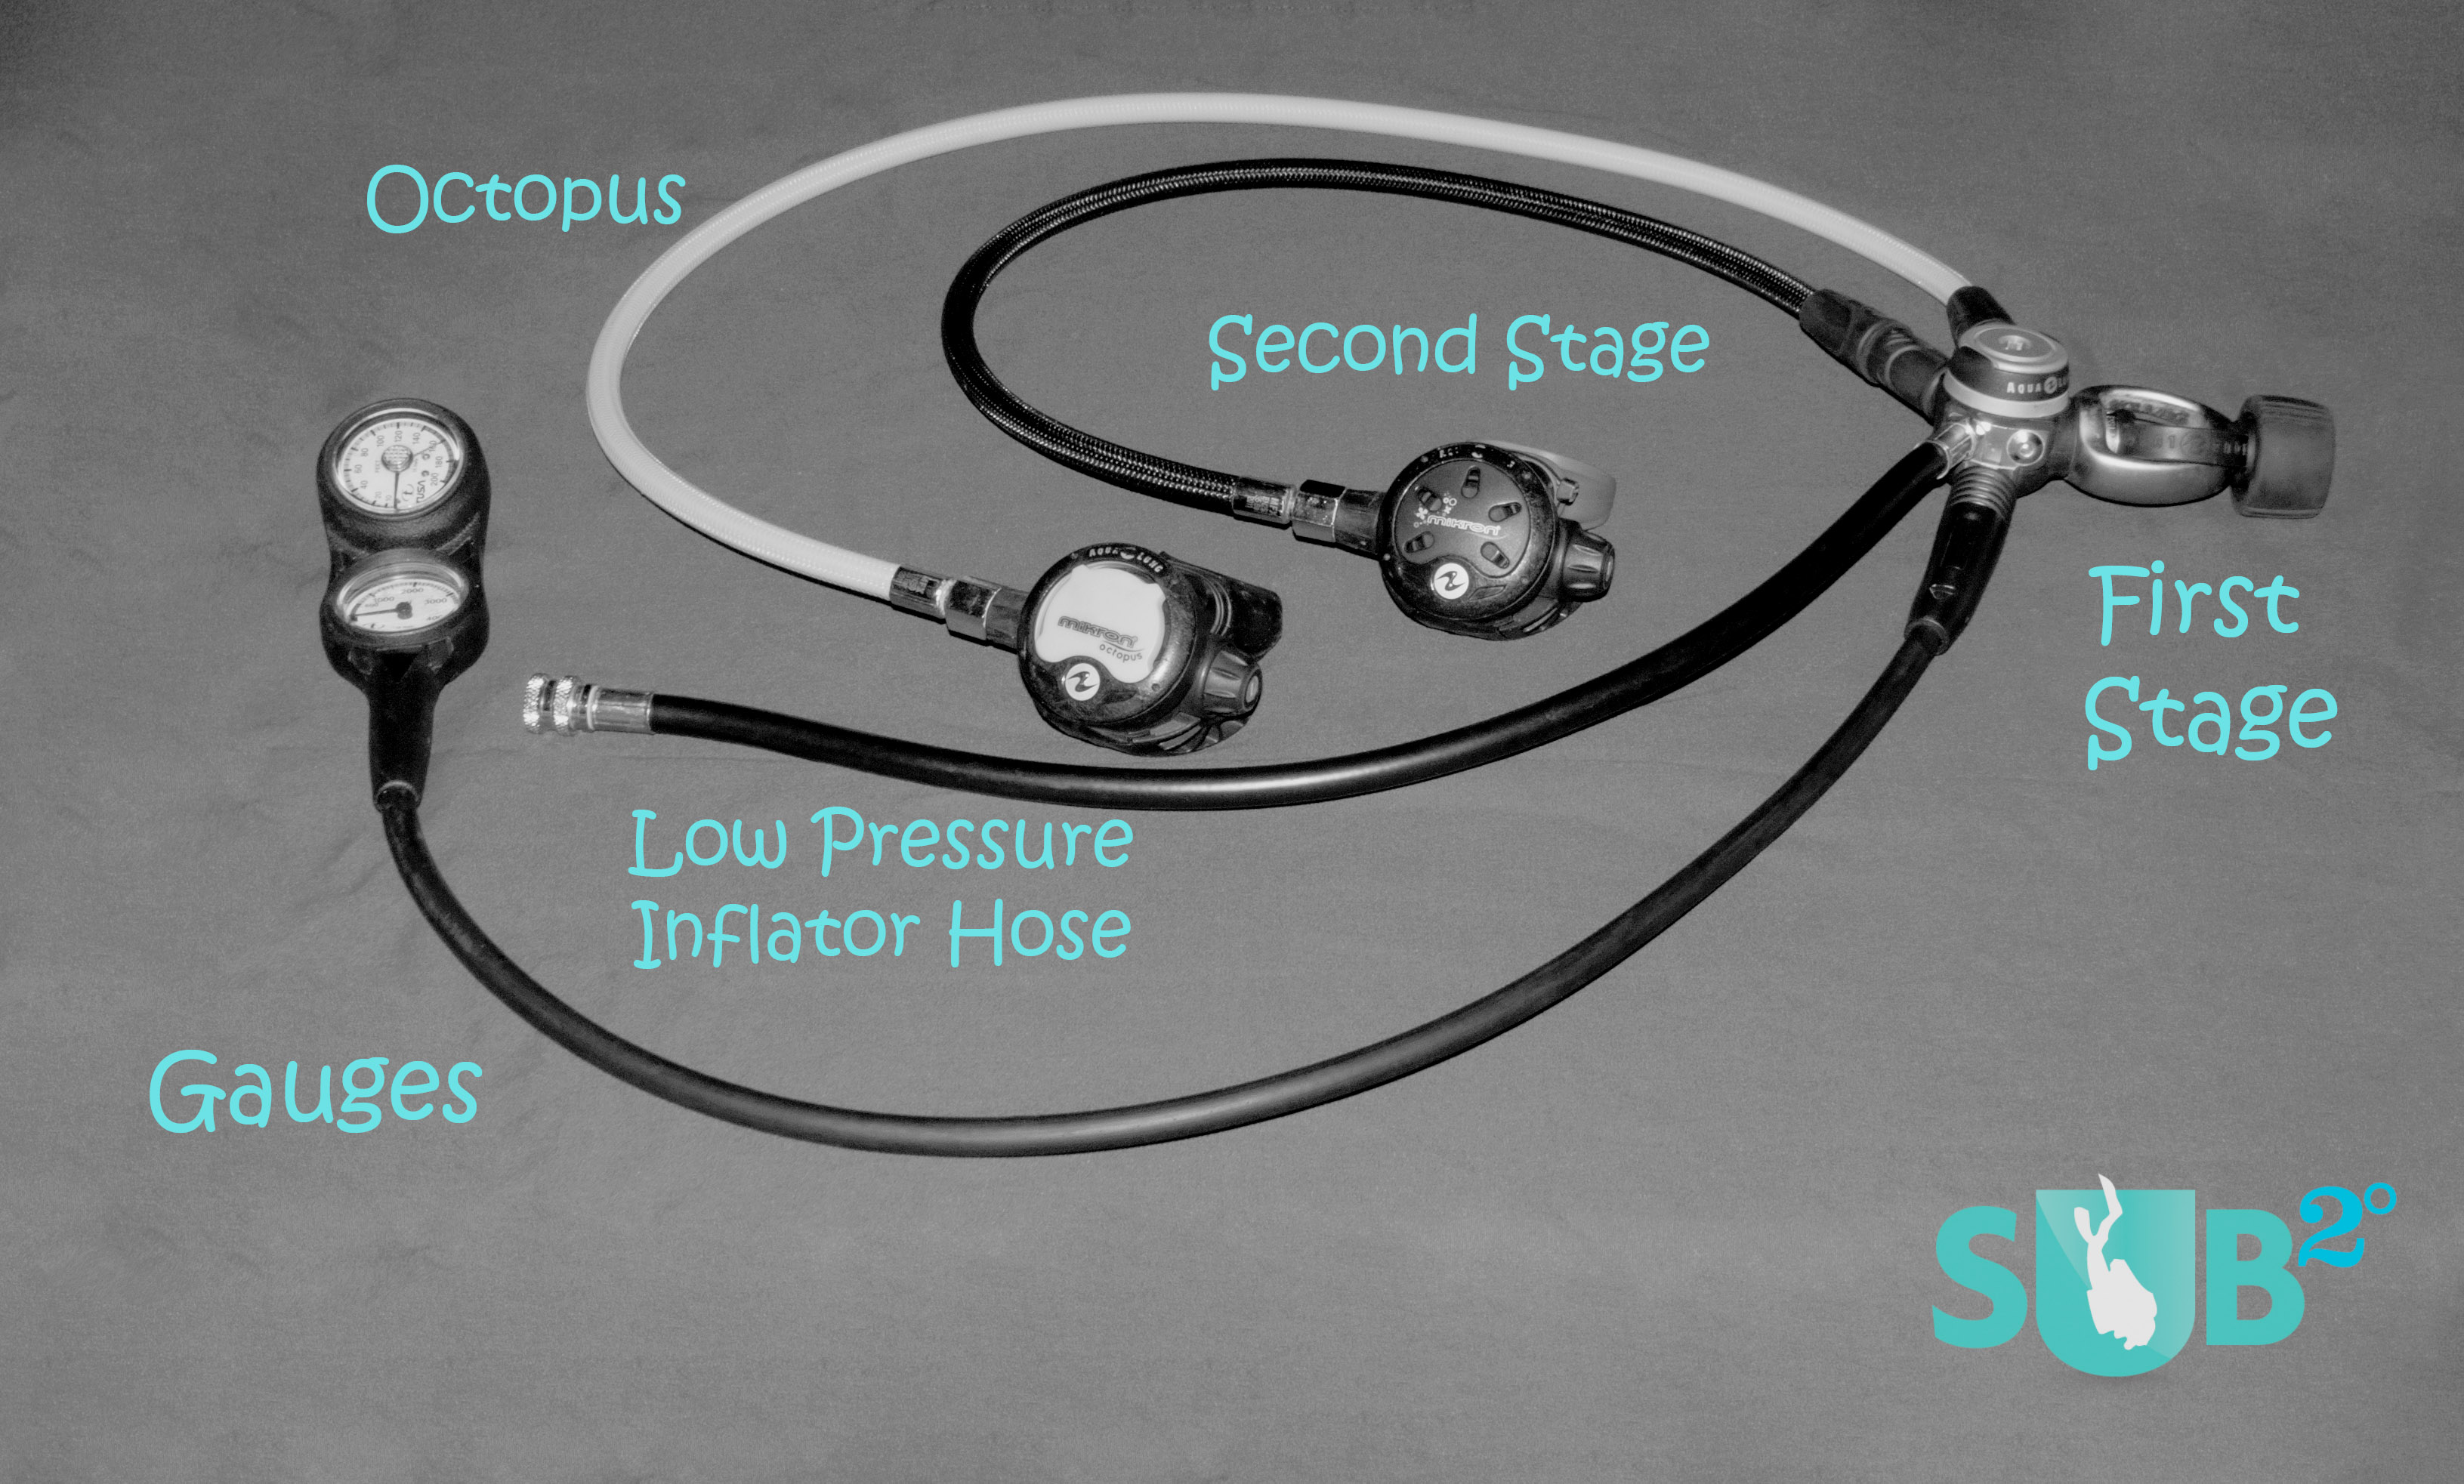 An example of a regulator system with a first stage, two second stages (primary and secondary), a low pressure inflator hose, and gauges.